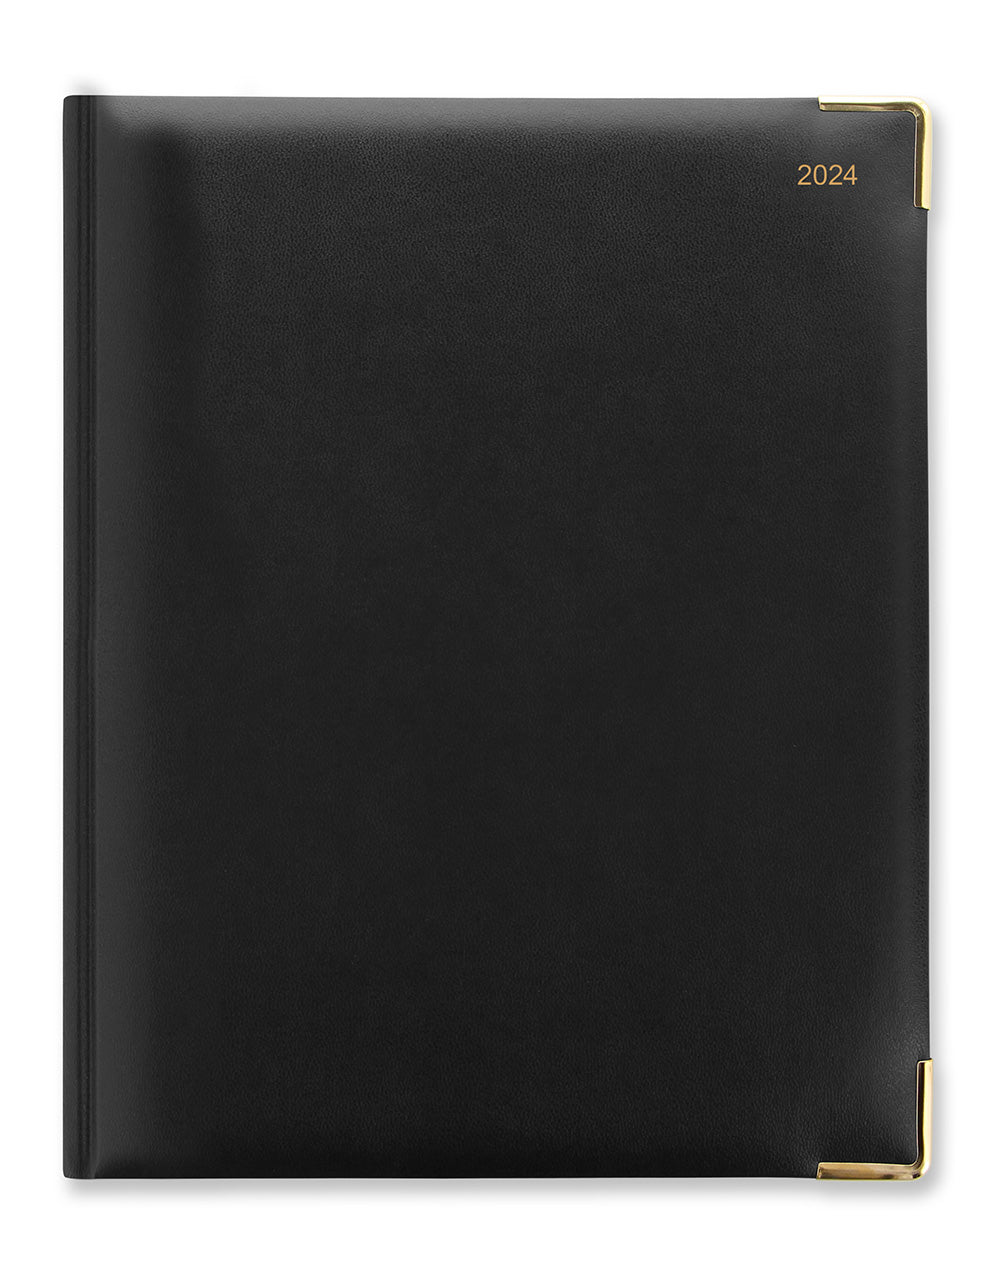 Letts of London 2024 Classic Quarto Vertical Week to View Planner with Appointments - Black